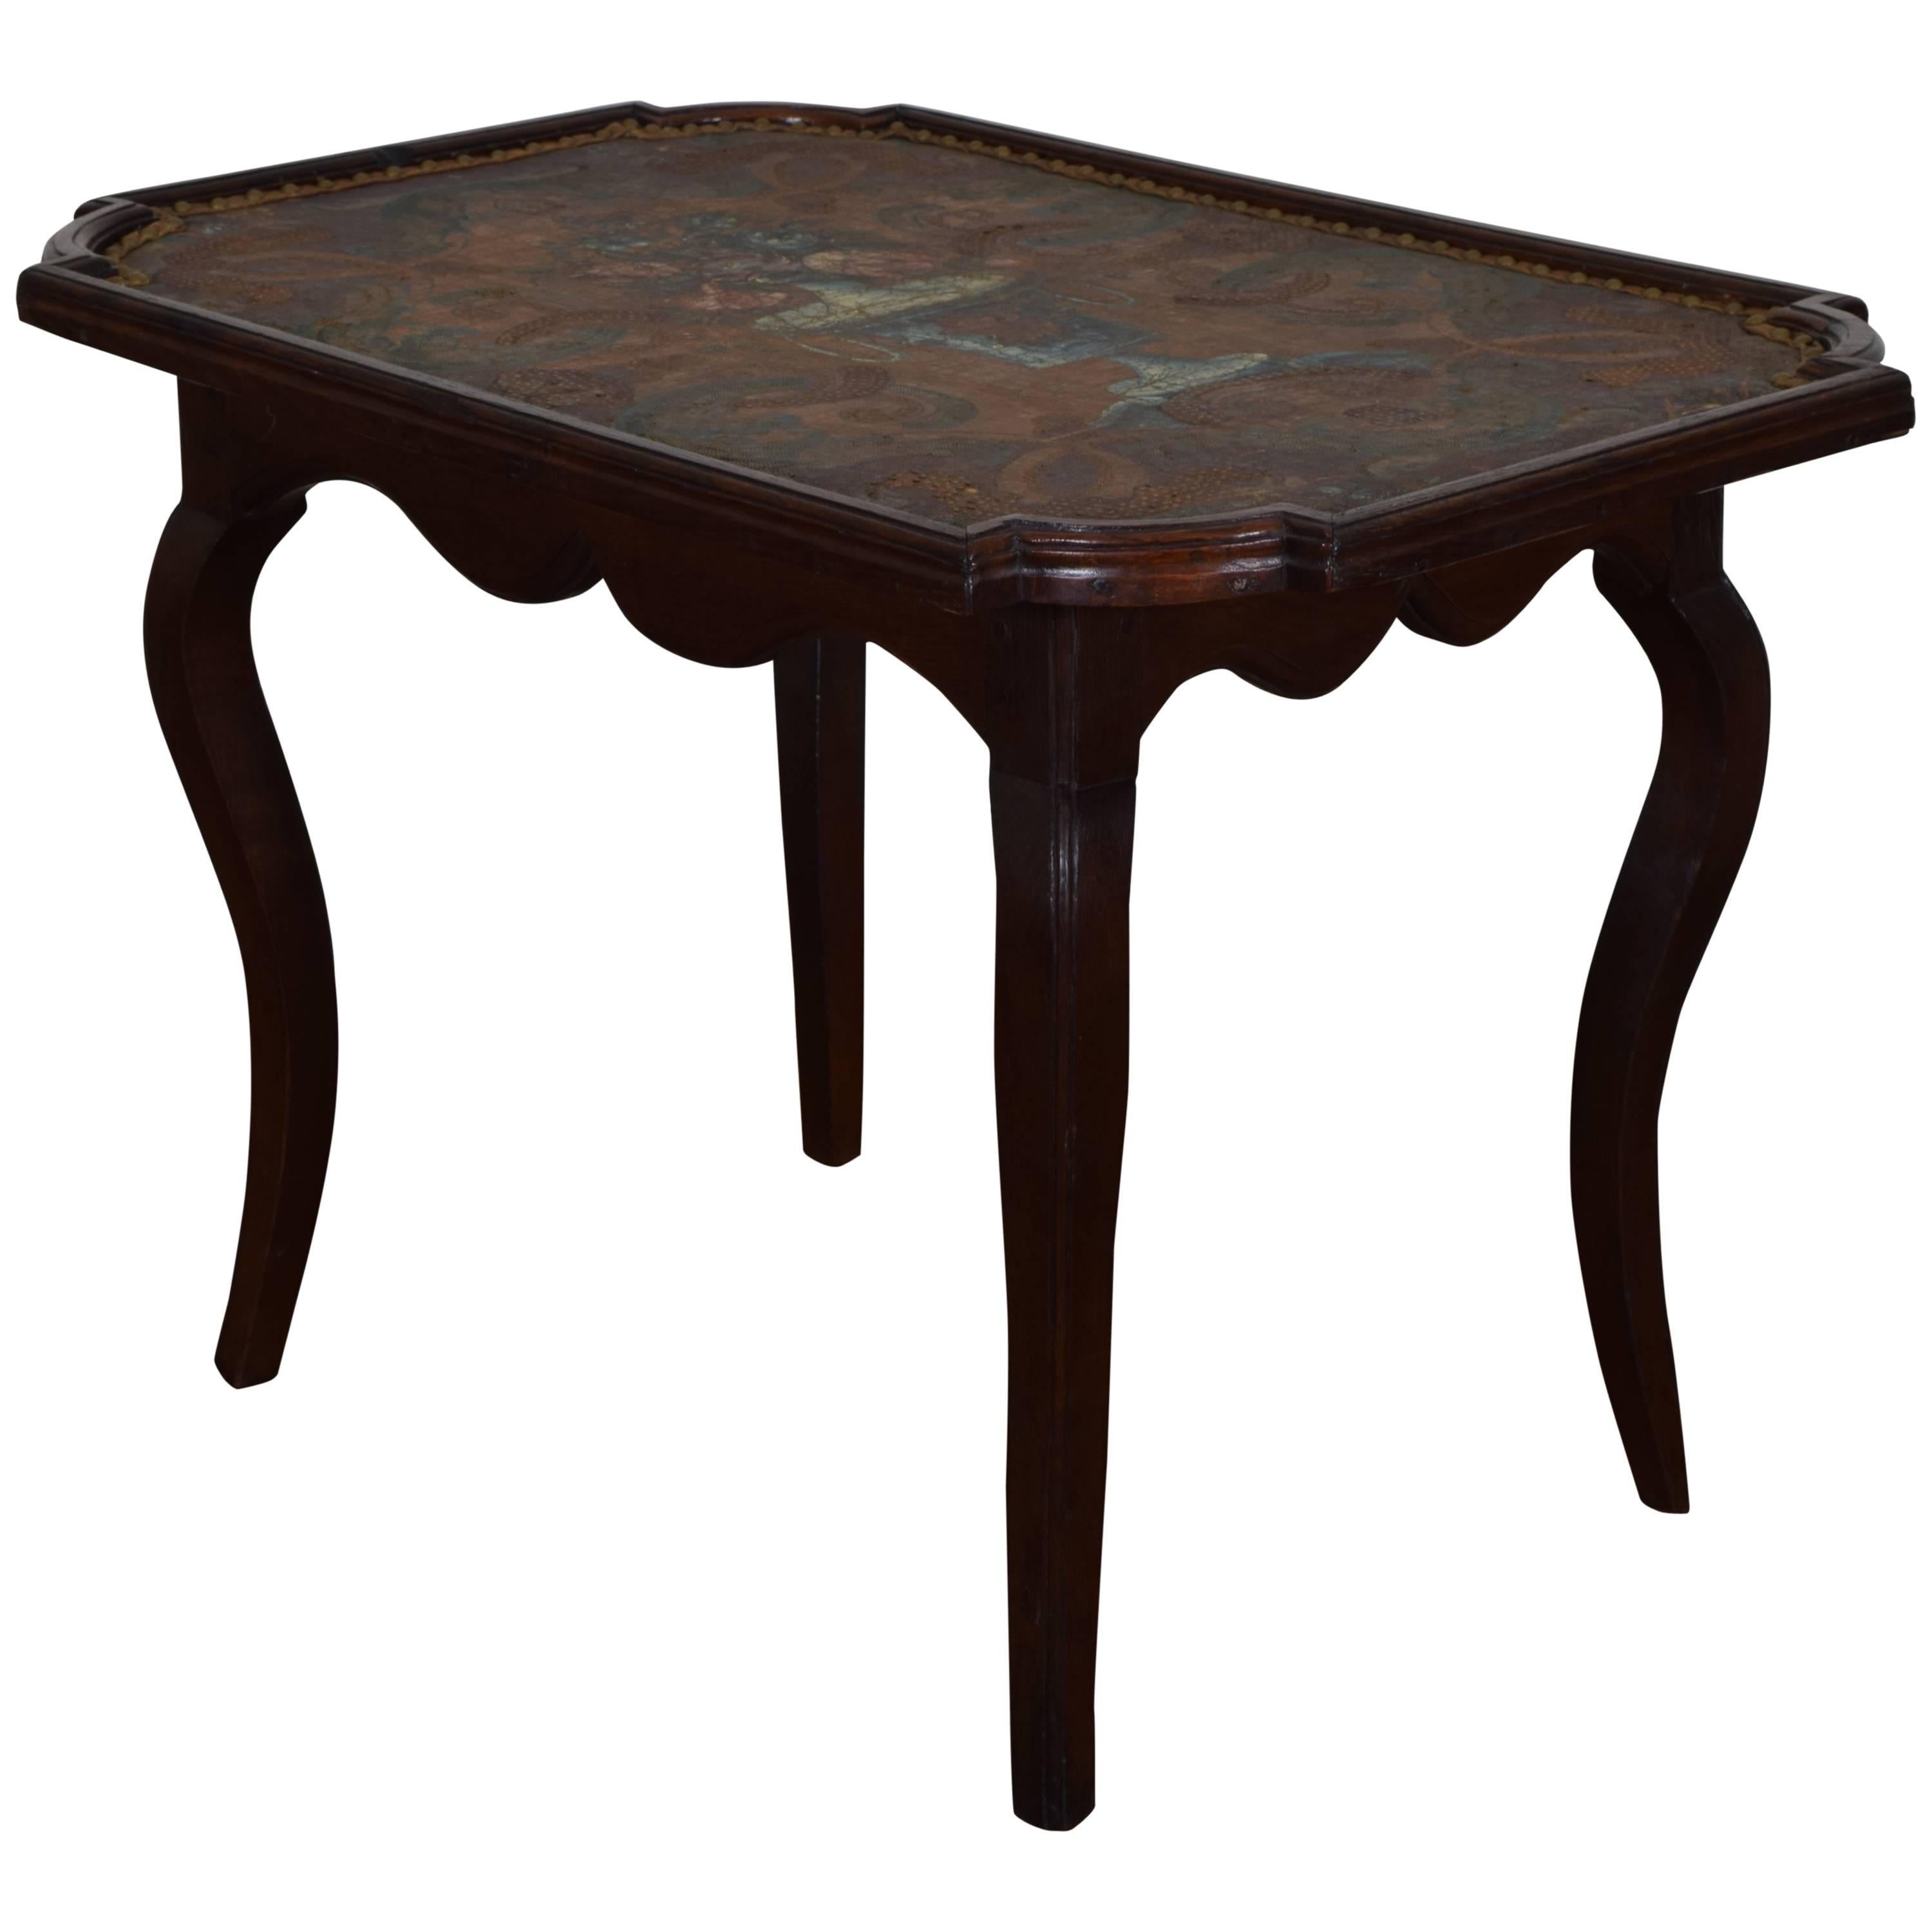 Louis XIV / Louis XV Oak and Leather Decorated Table